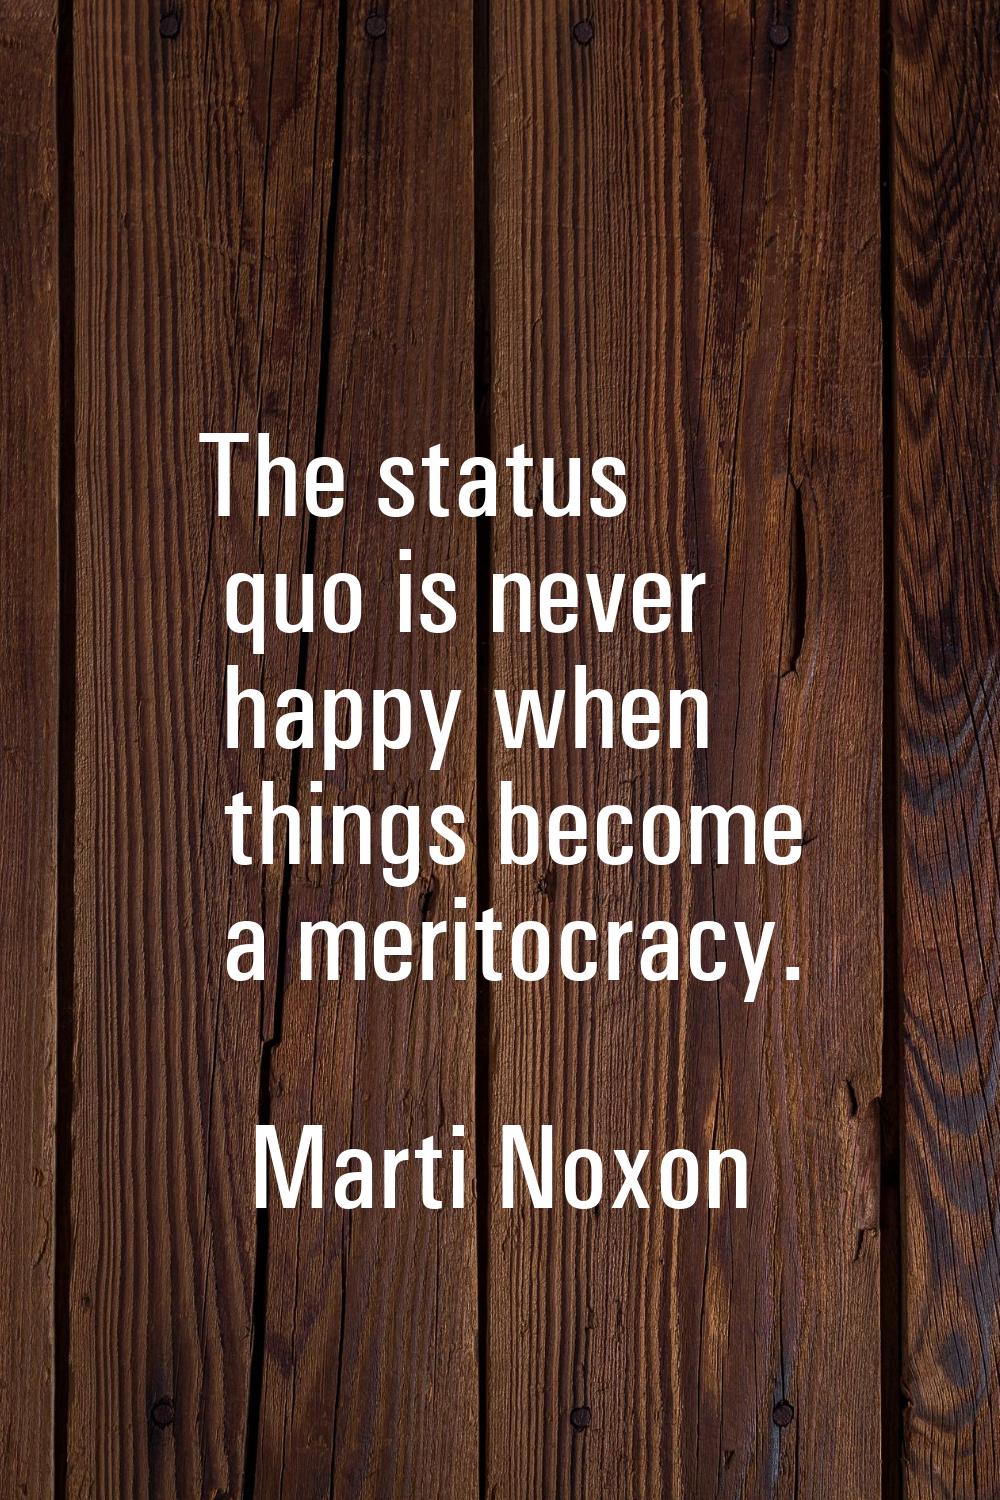 The status quo is never happy when things become a meritocracy.